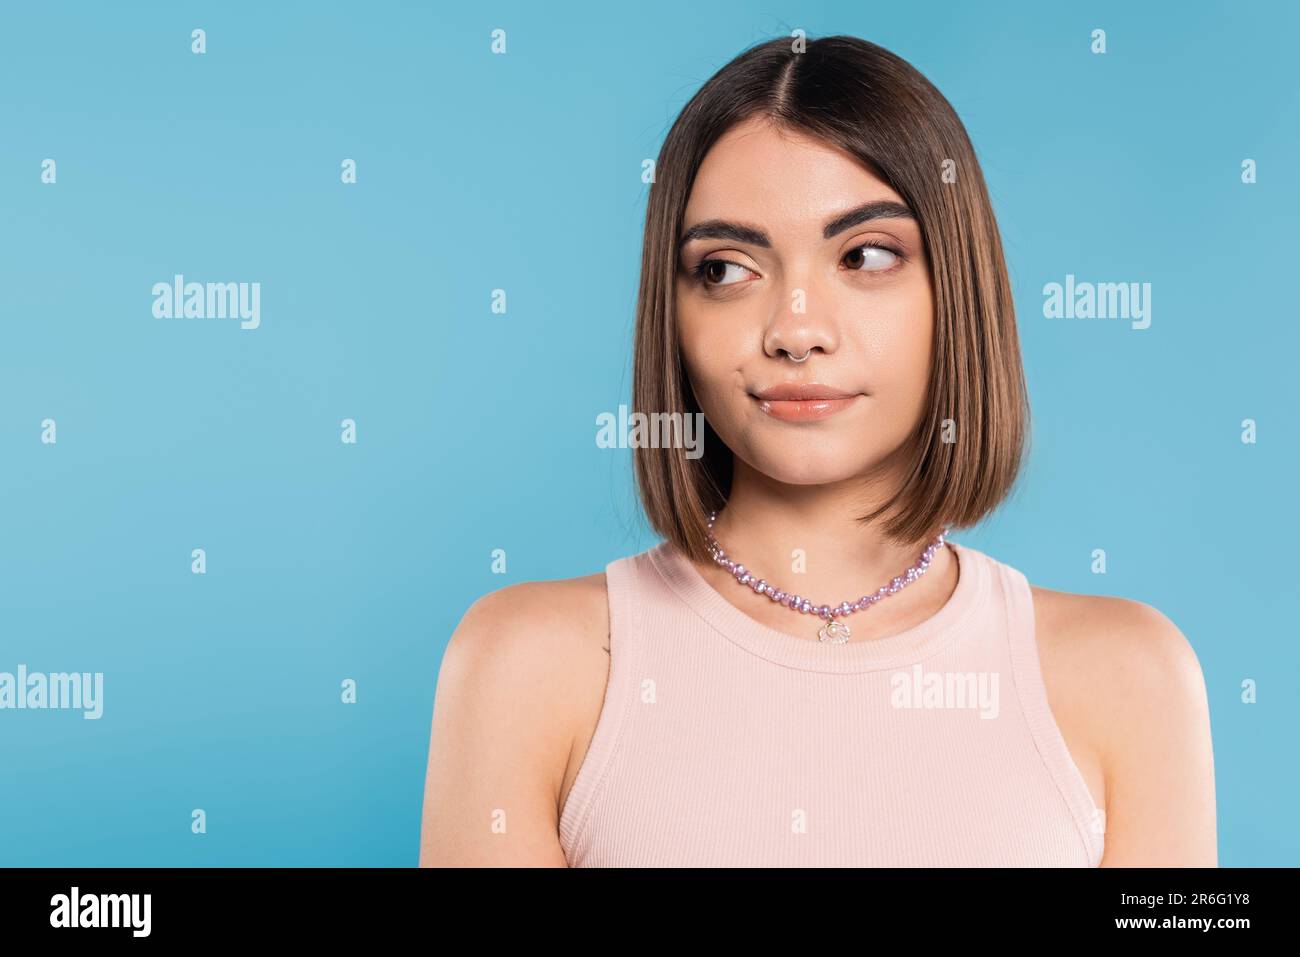 doubting, young brunette woman with short hair and nose piercing standing in tank top and looking away on blue background, youth culture, skepticism, Stock Photo